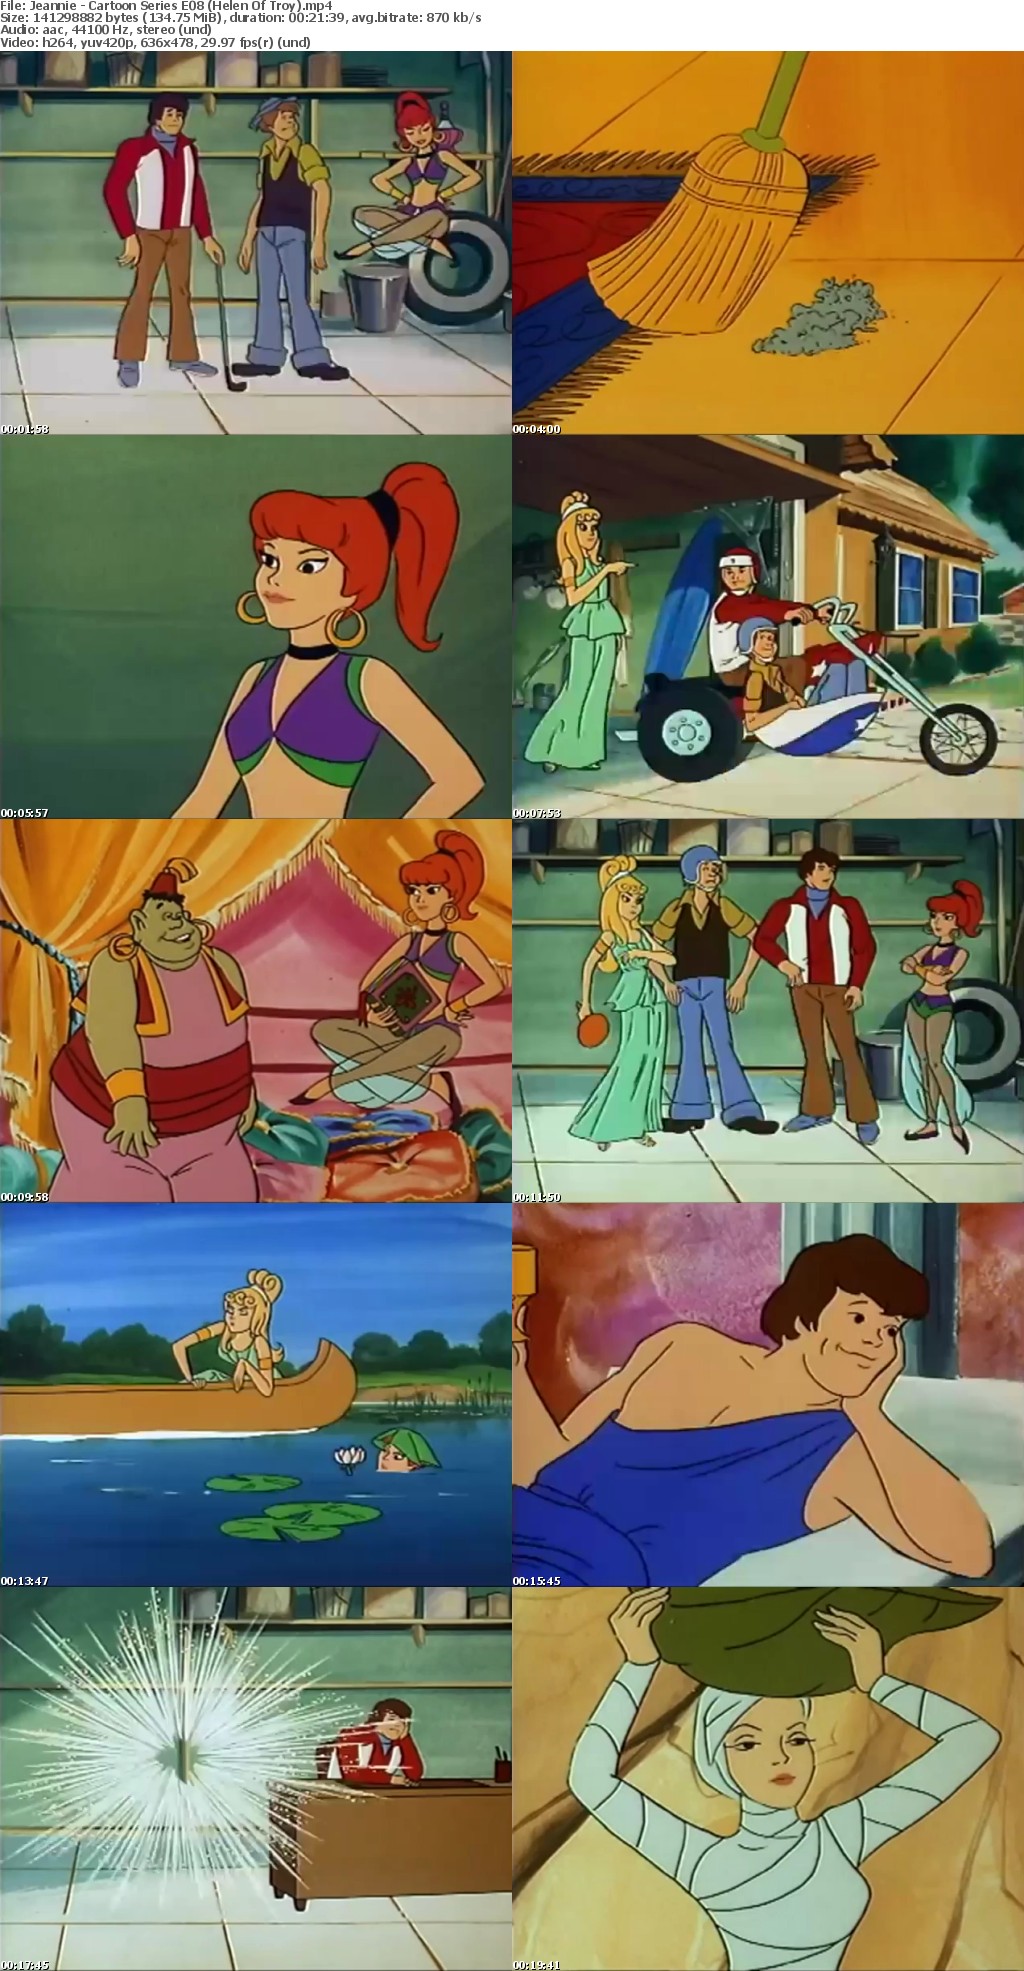 Jeannie (Complete cartoon series in MP4 format)